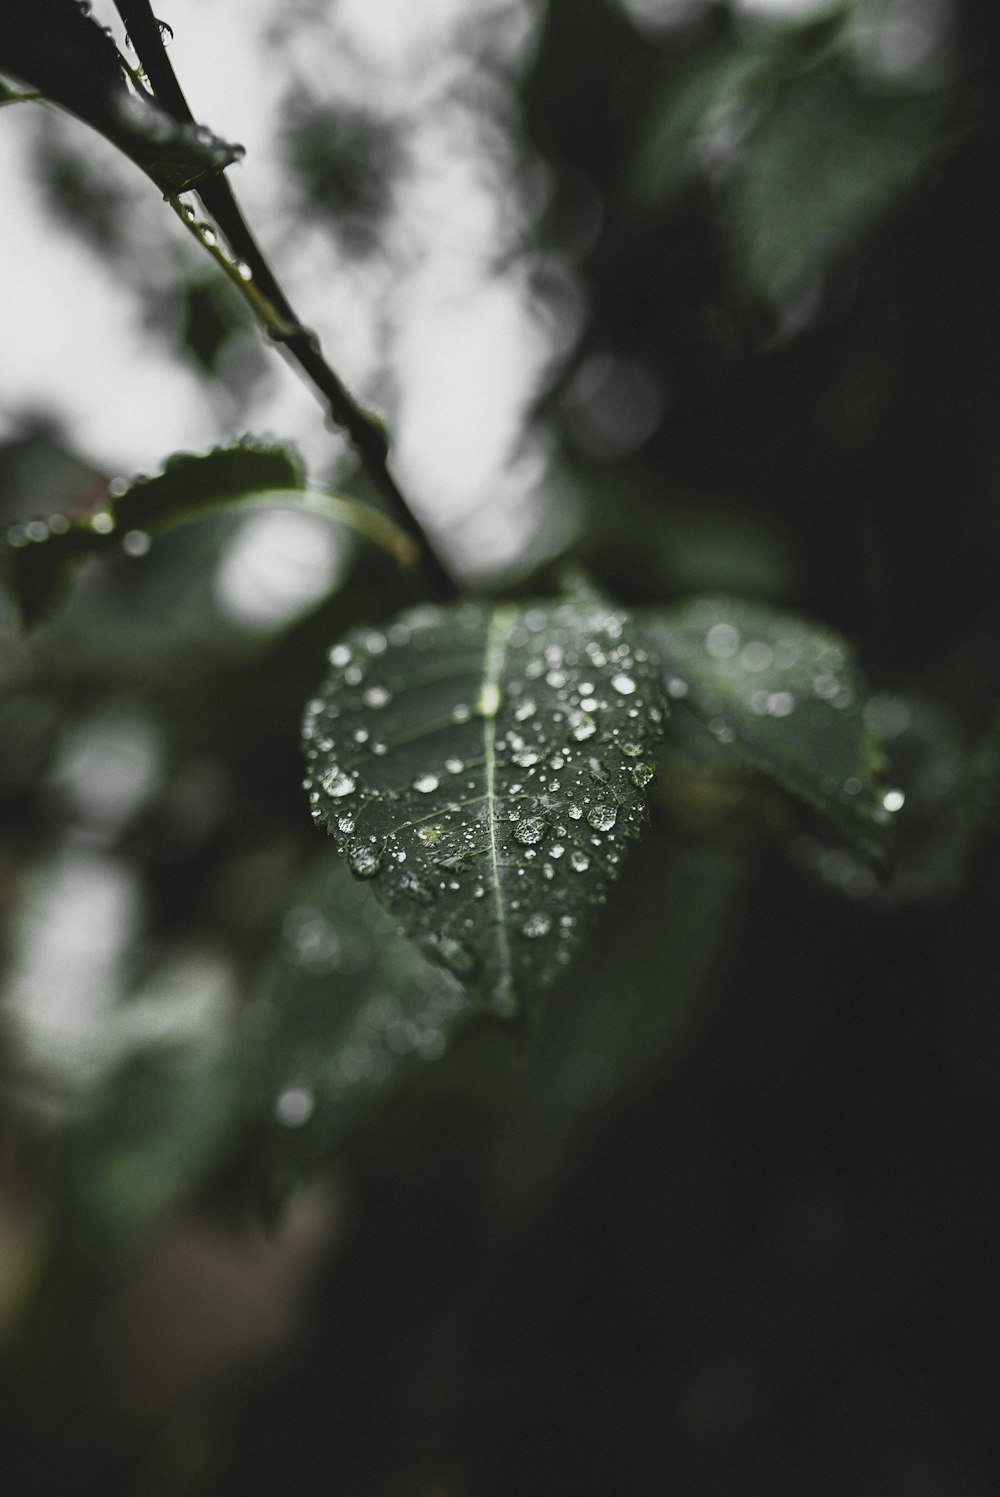 a leaf with drops of water on it